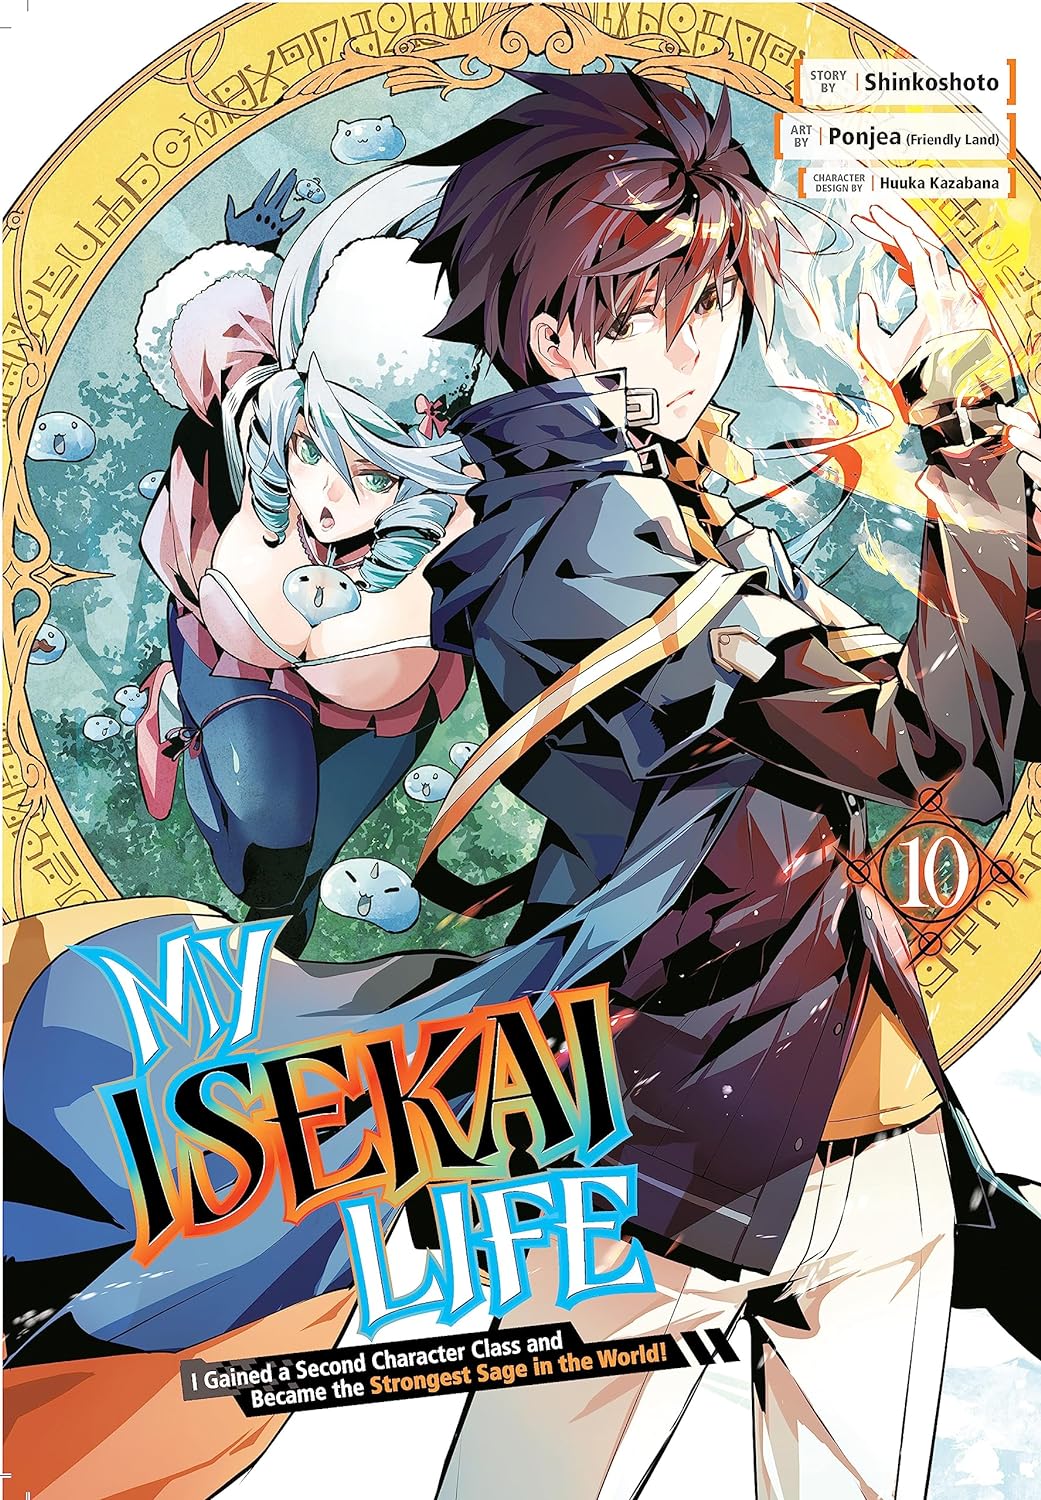 My Isekai Life: I Gained a Second Character Class and Became the Strongest Sage in the World! Vol. 10